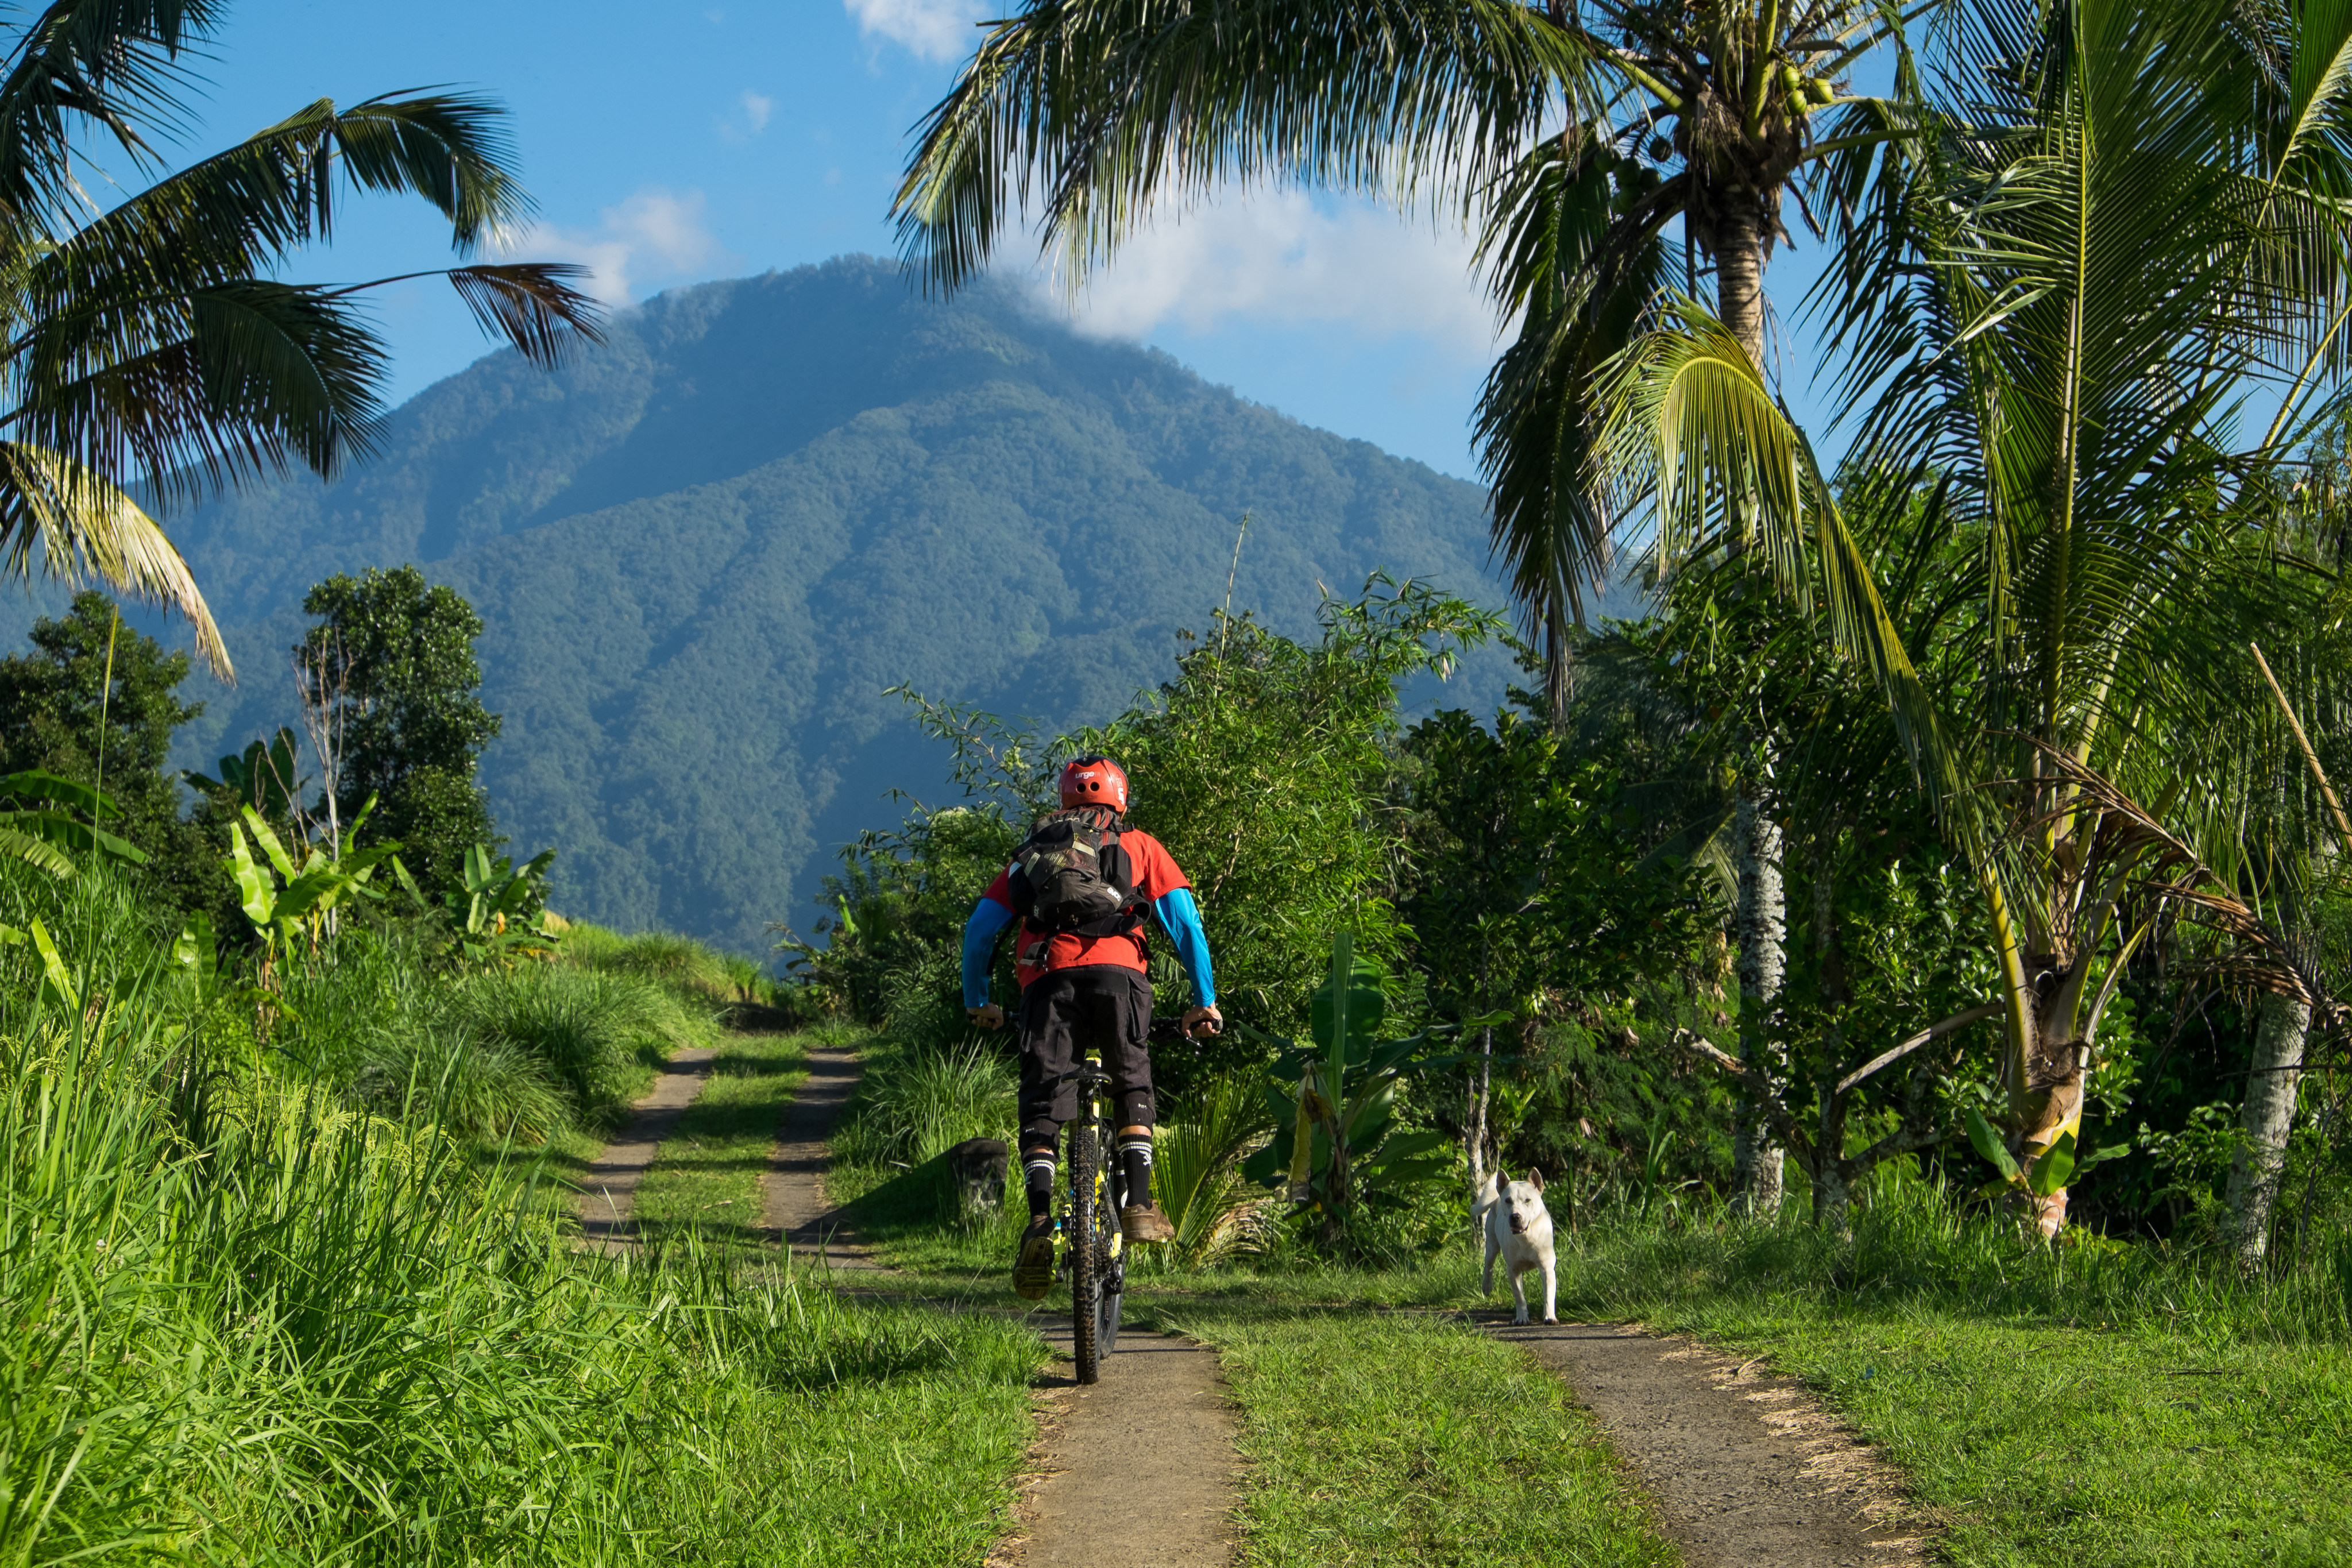 Head off-site to really discover a destination, such as this trail through rice fields in Bali. Photo: Steve Thomas